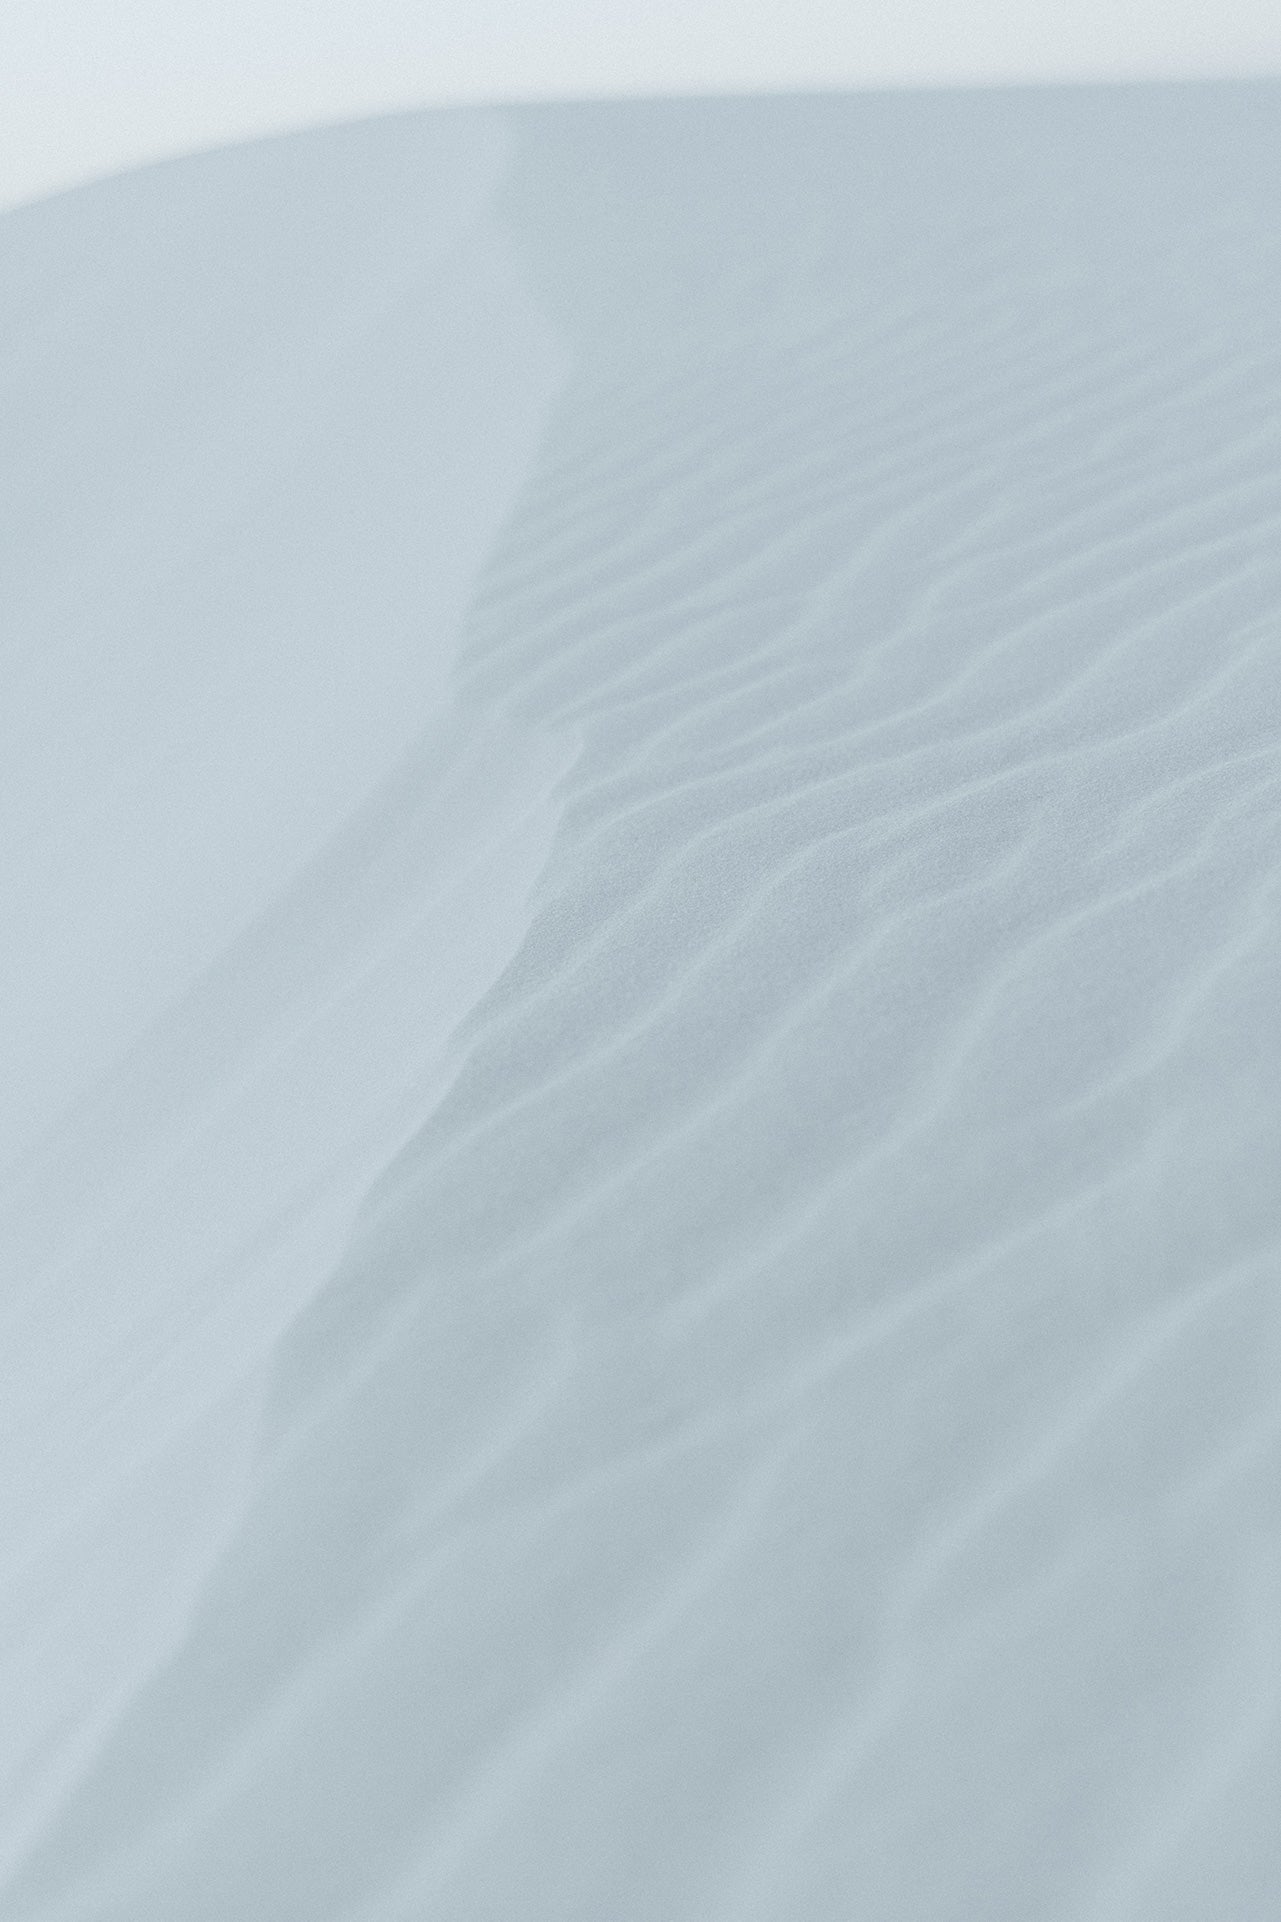 Photography: White Sands Crest - Organ Mountain Outfitters